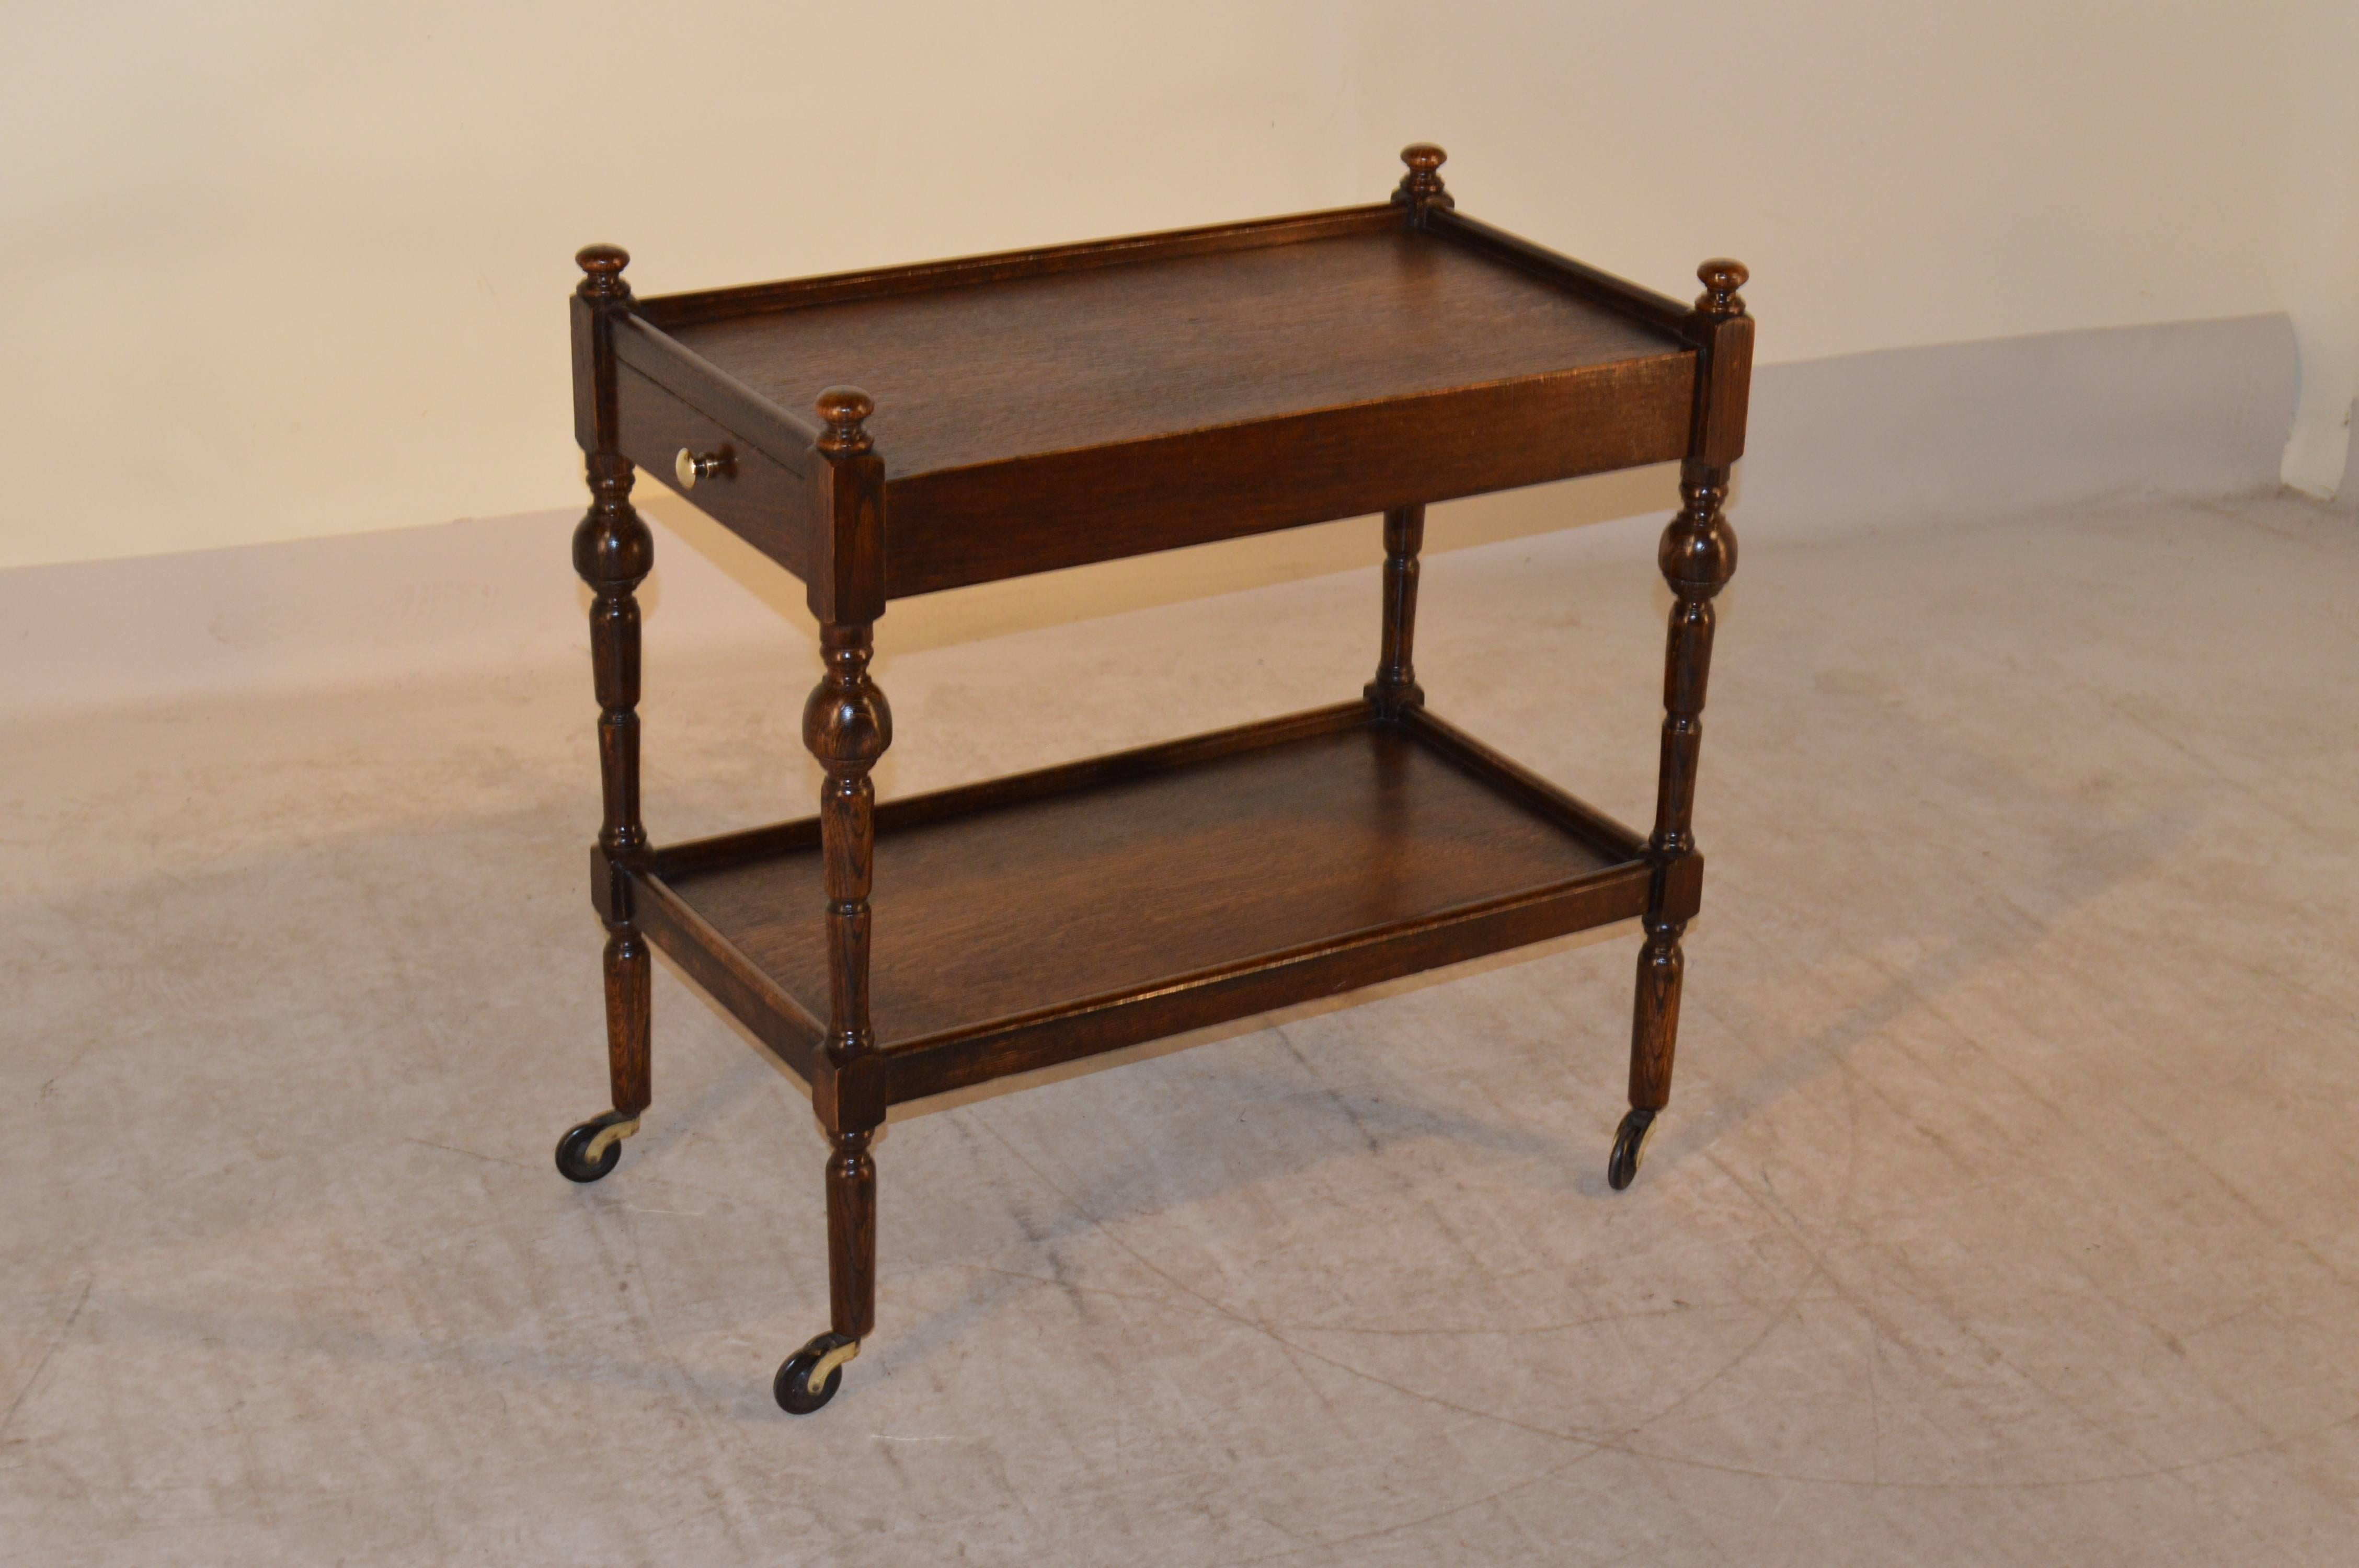 English oak drinks cart, circa 1900 with two shelves and a single drawer, raised on hand-turned legs which end in the original casters.